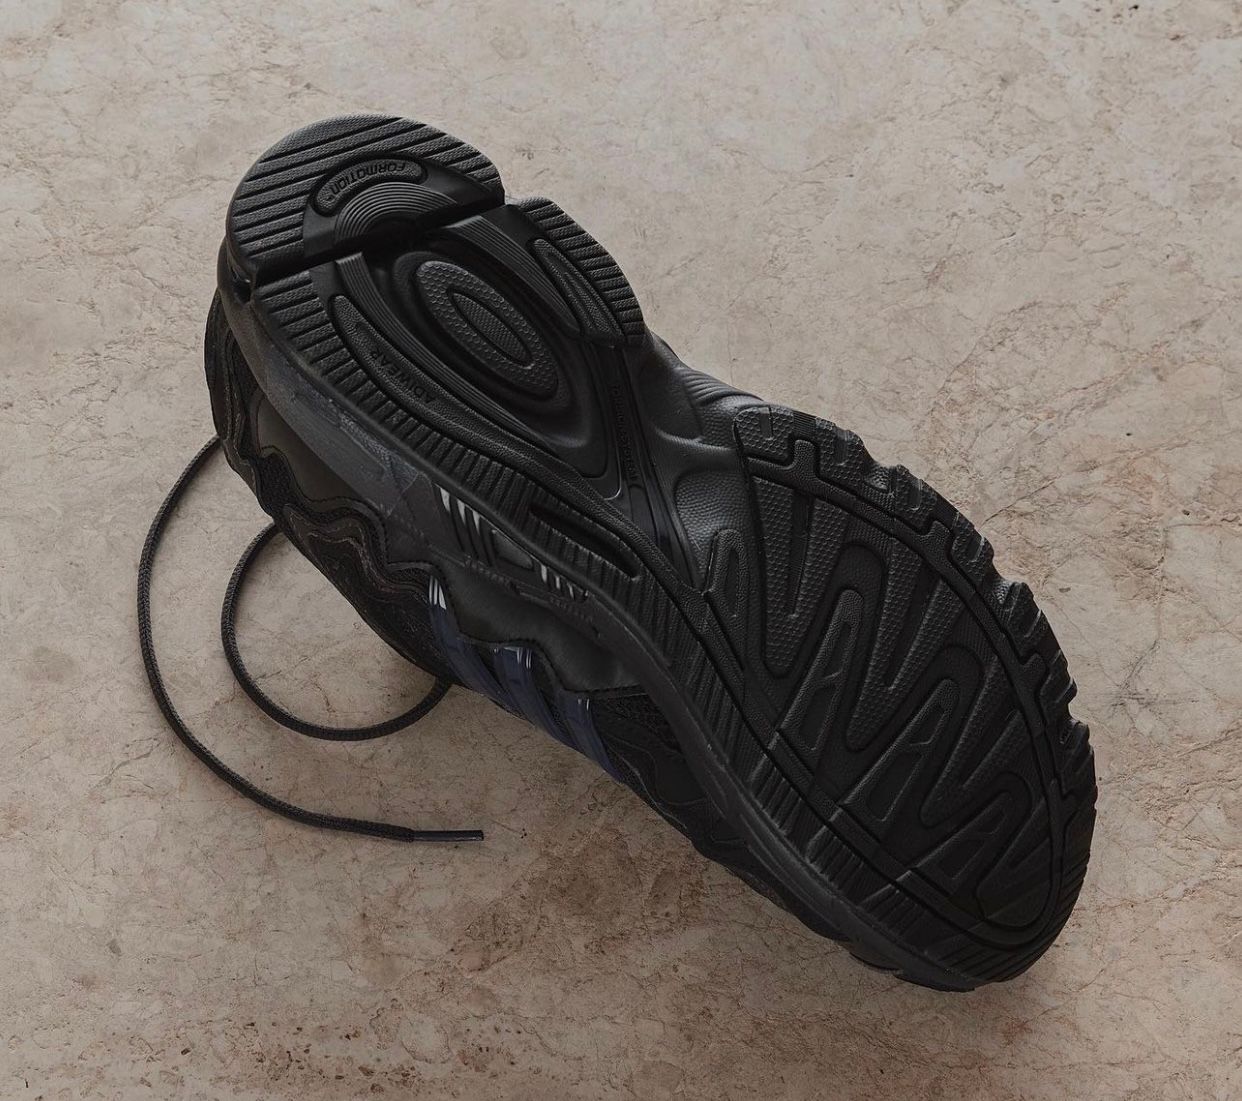 TheSiteSupply Images Bad Bunny Adidas Response Cl Black 